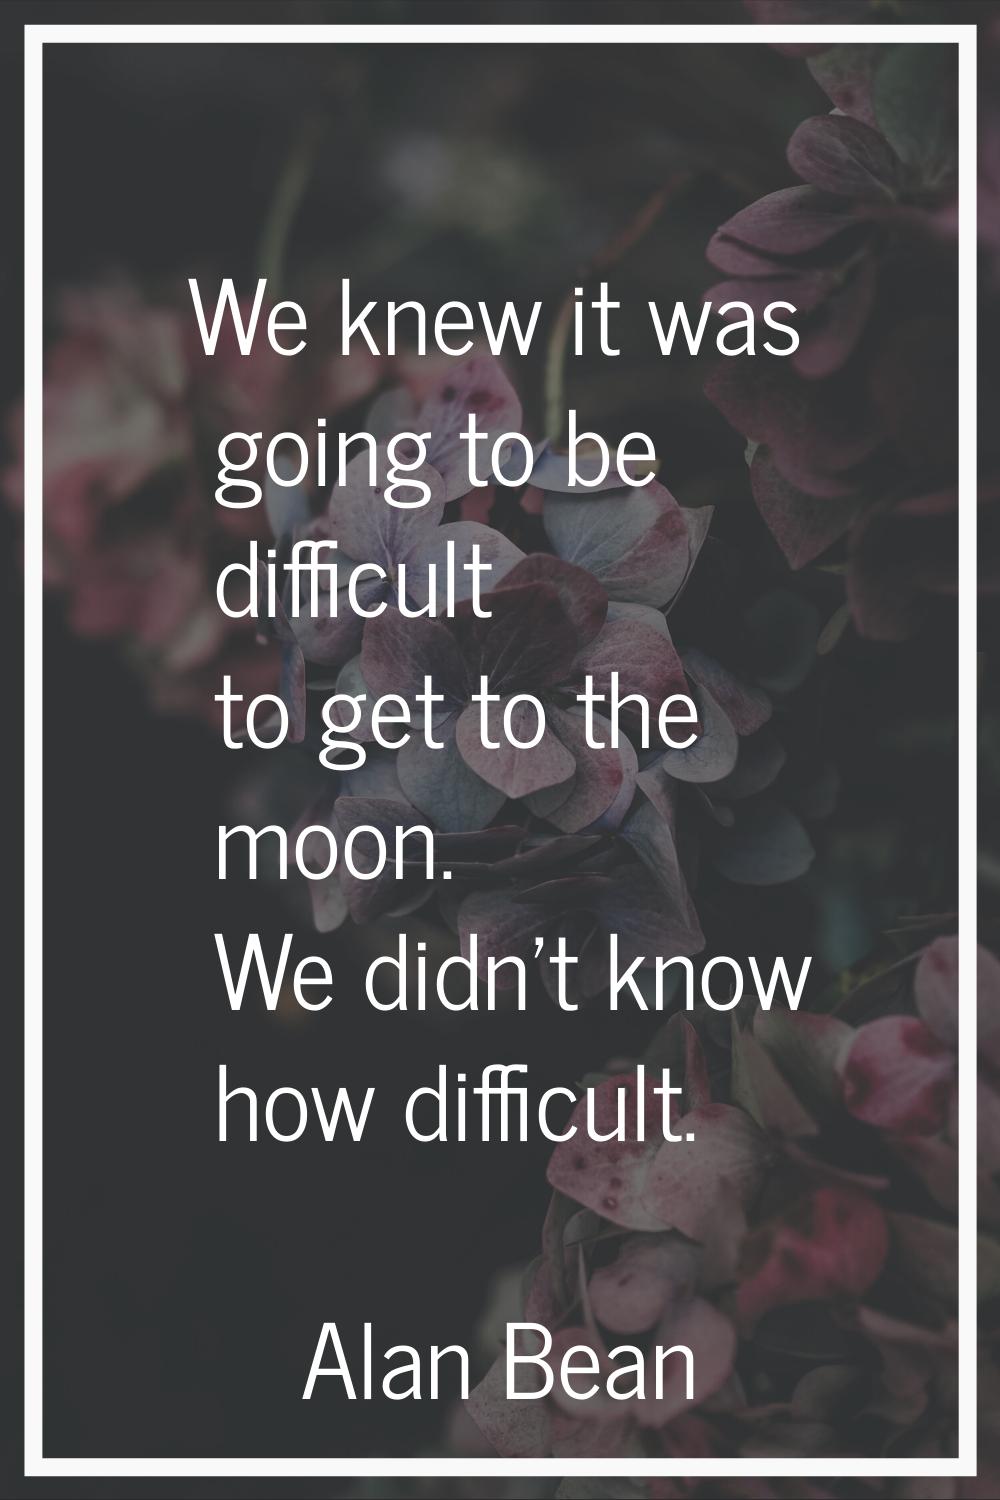 We knew it was going to be difficult to get to the moon. We didn't know how difficult.